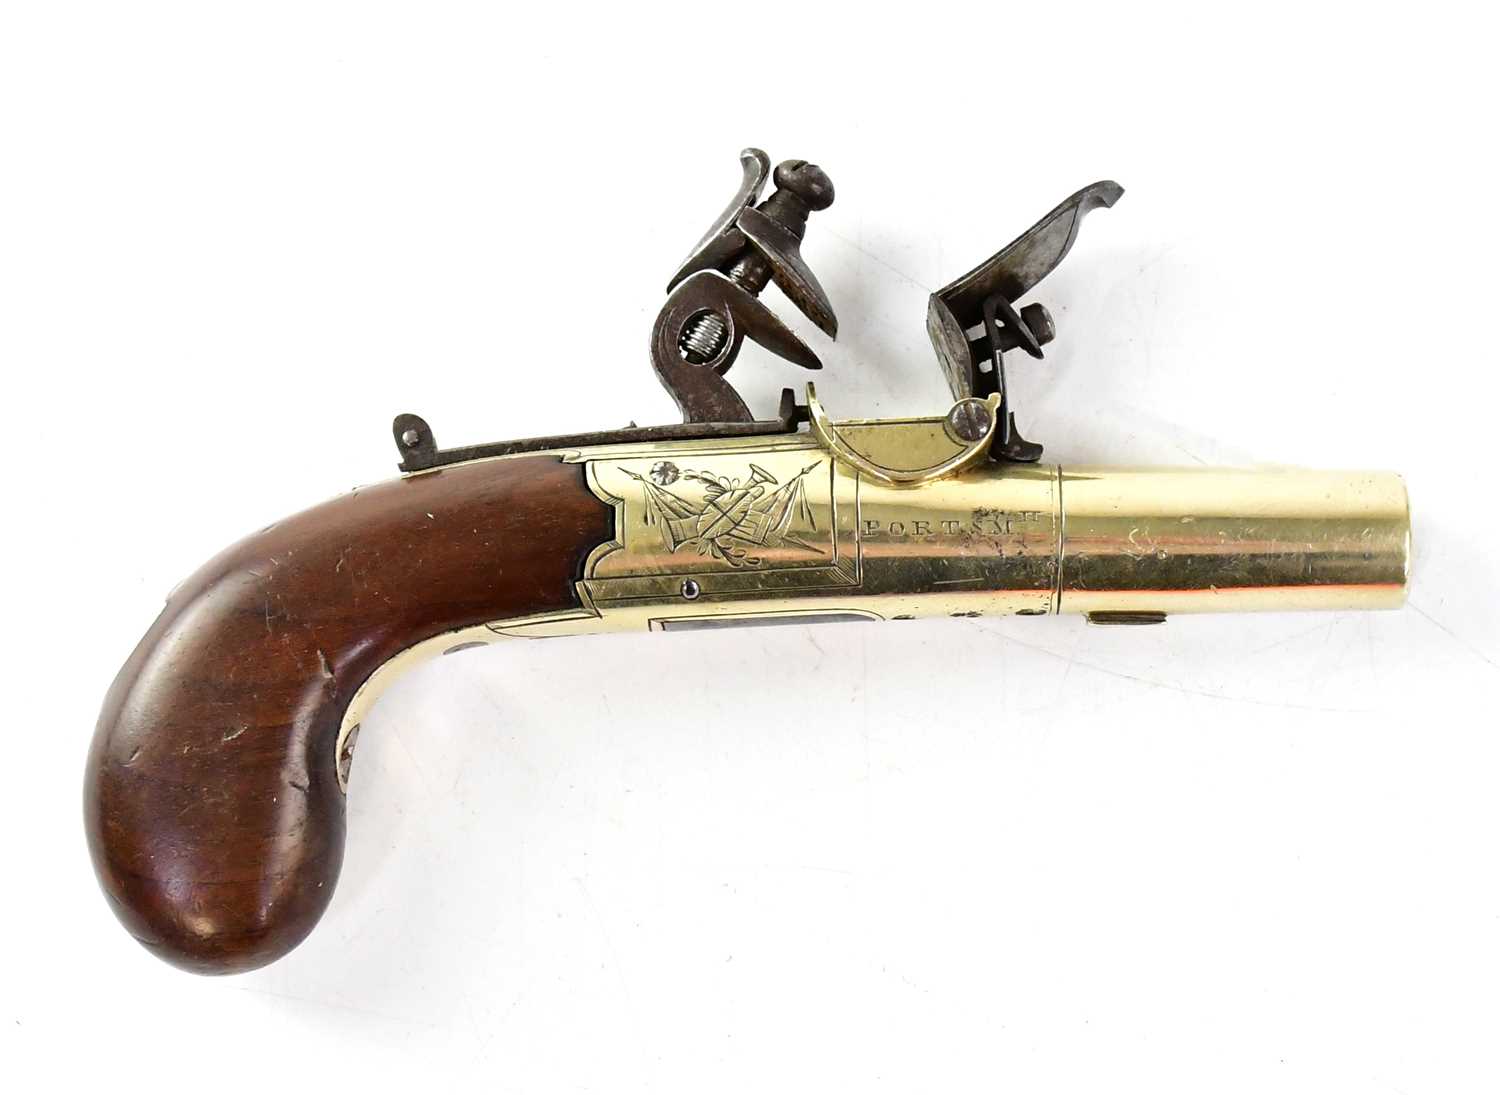 DUDLEY, PORTSMOUTH; a late 18th/early 19th all brass 54 bore flintlock pocket pistol with 1.5"